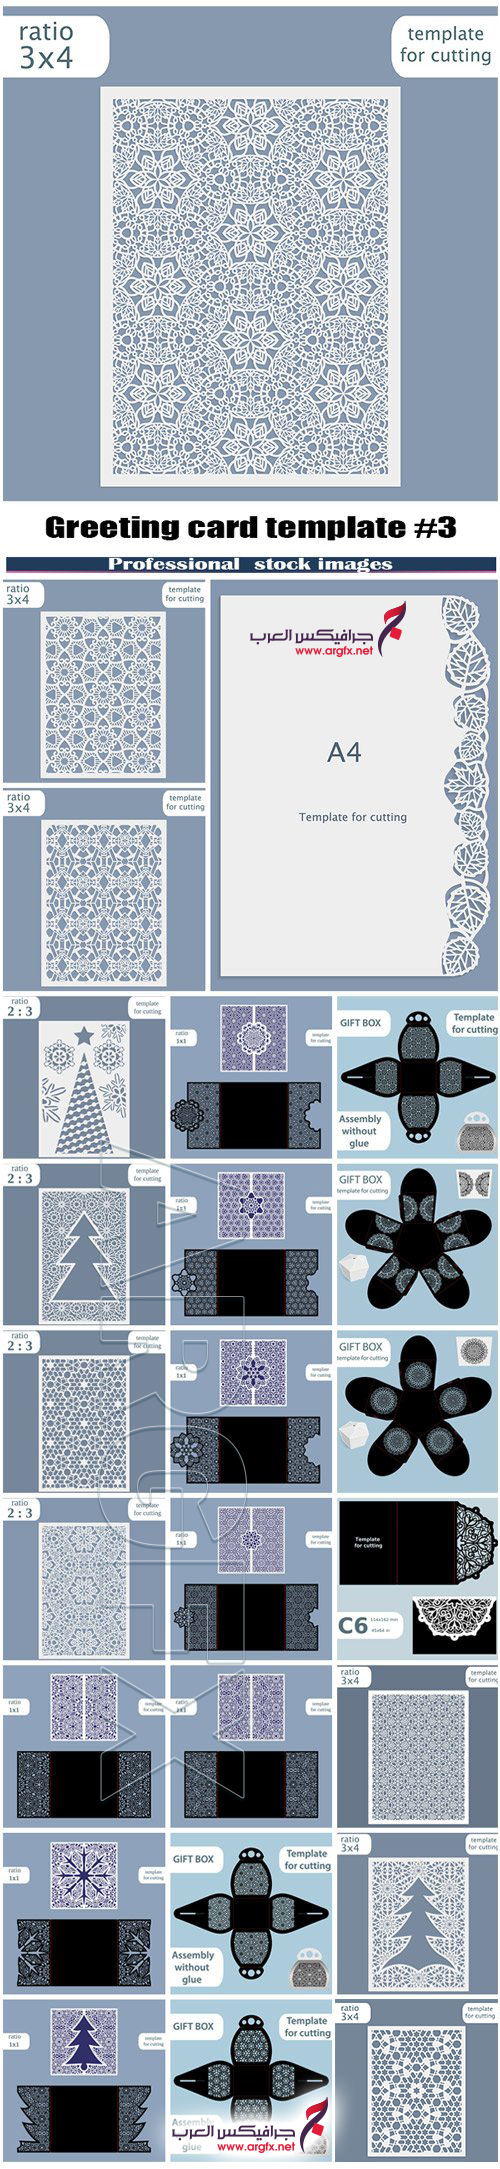  Greeting card template for cutting plotter #3